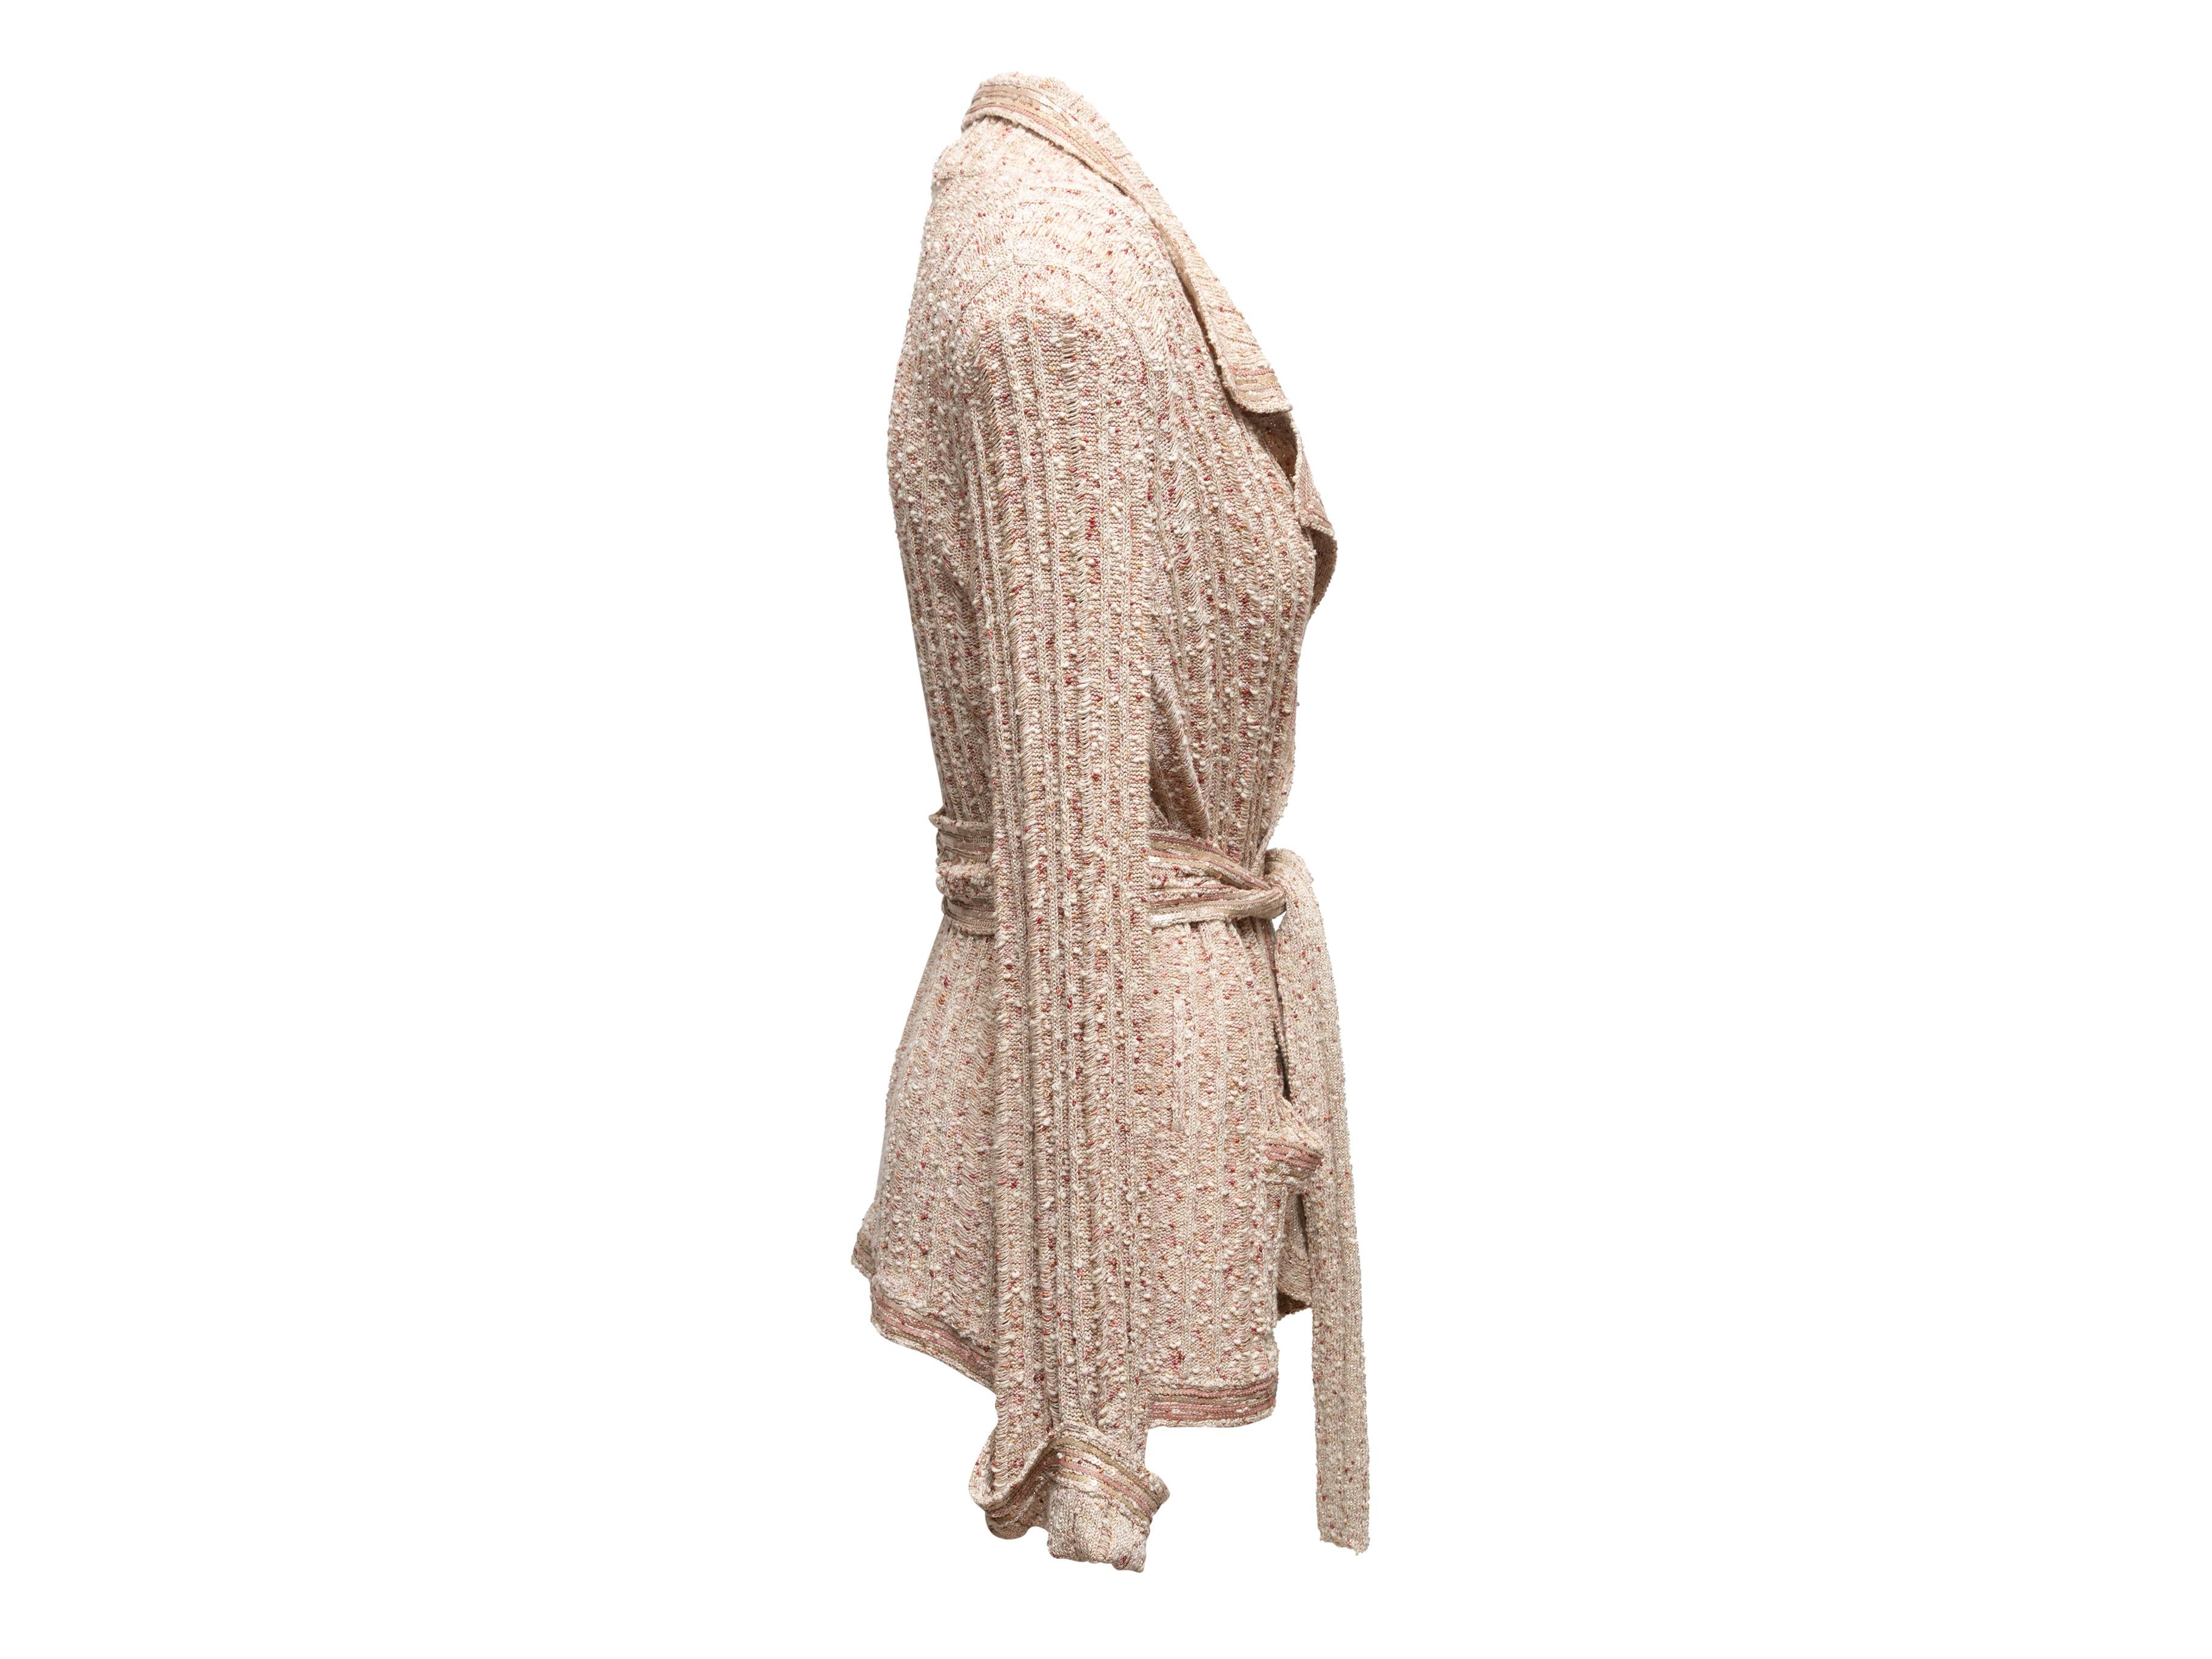  Beige boucle knit jacket by Chanel. From the Spring/Summer 2006 Collection. Notched collar. Dual hip pockets. Sequin trim throughout. Sash tie closure at waist. 40